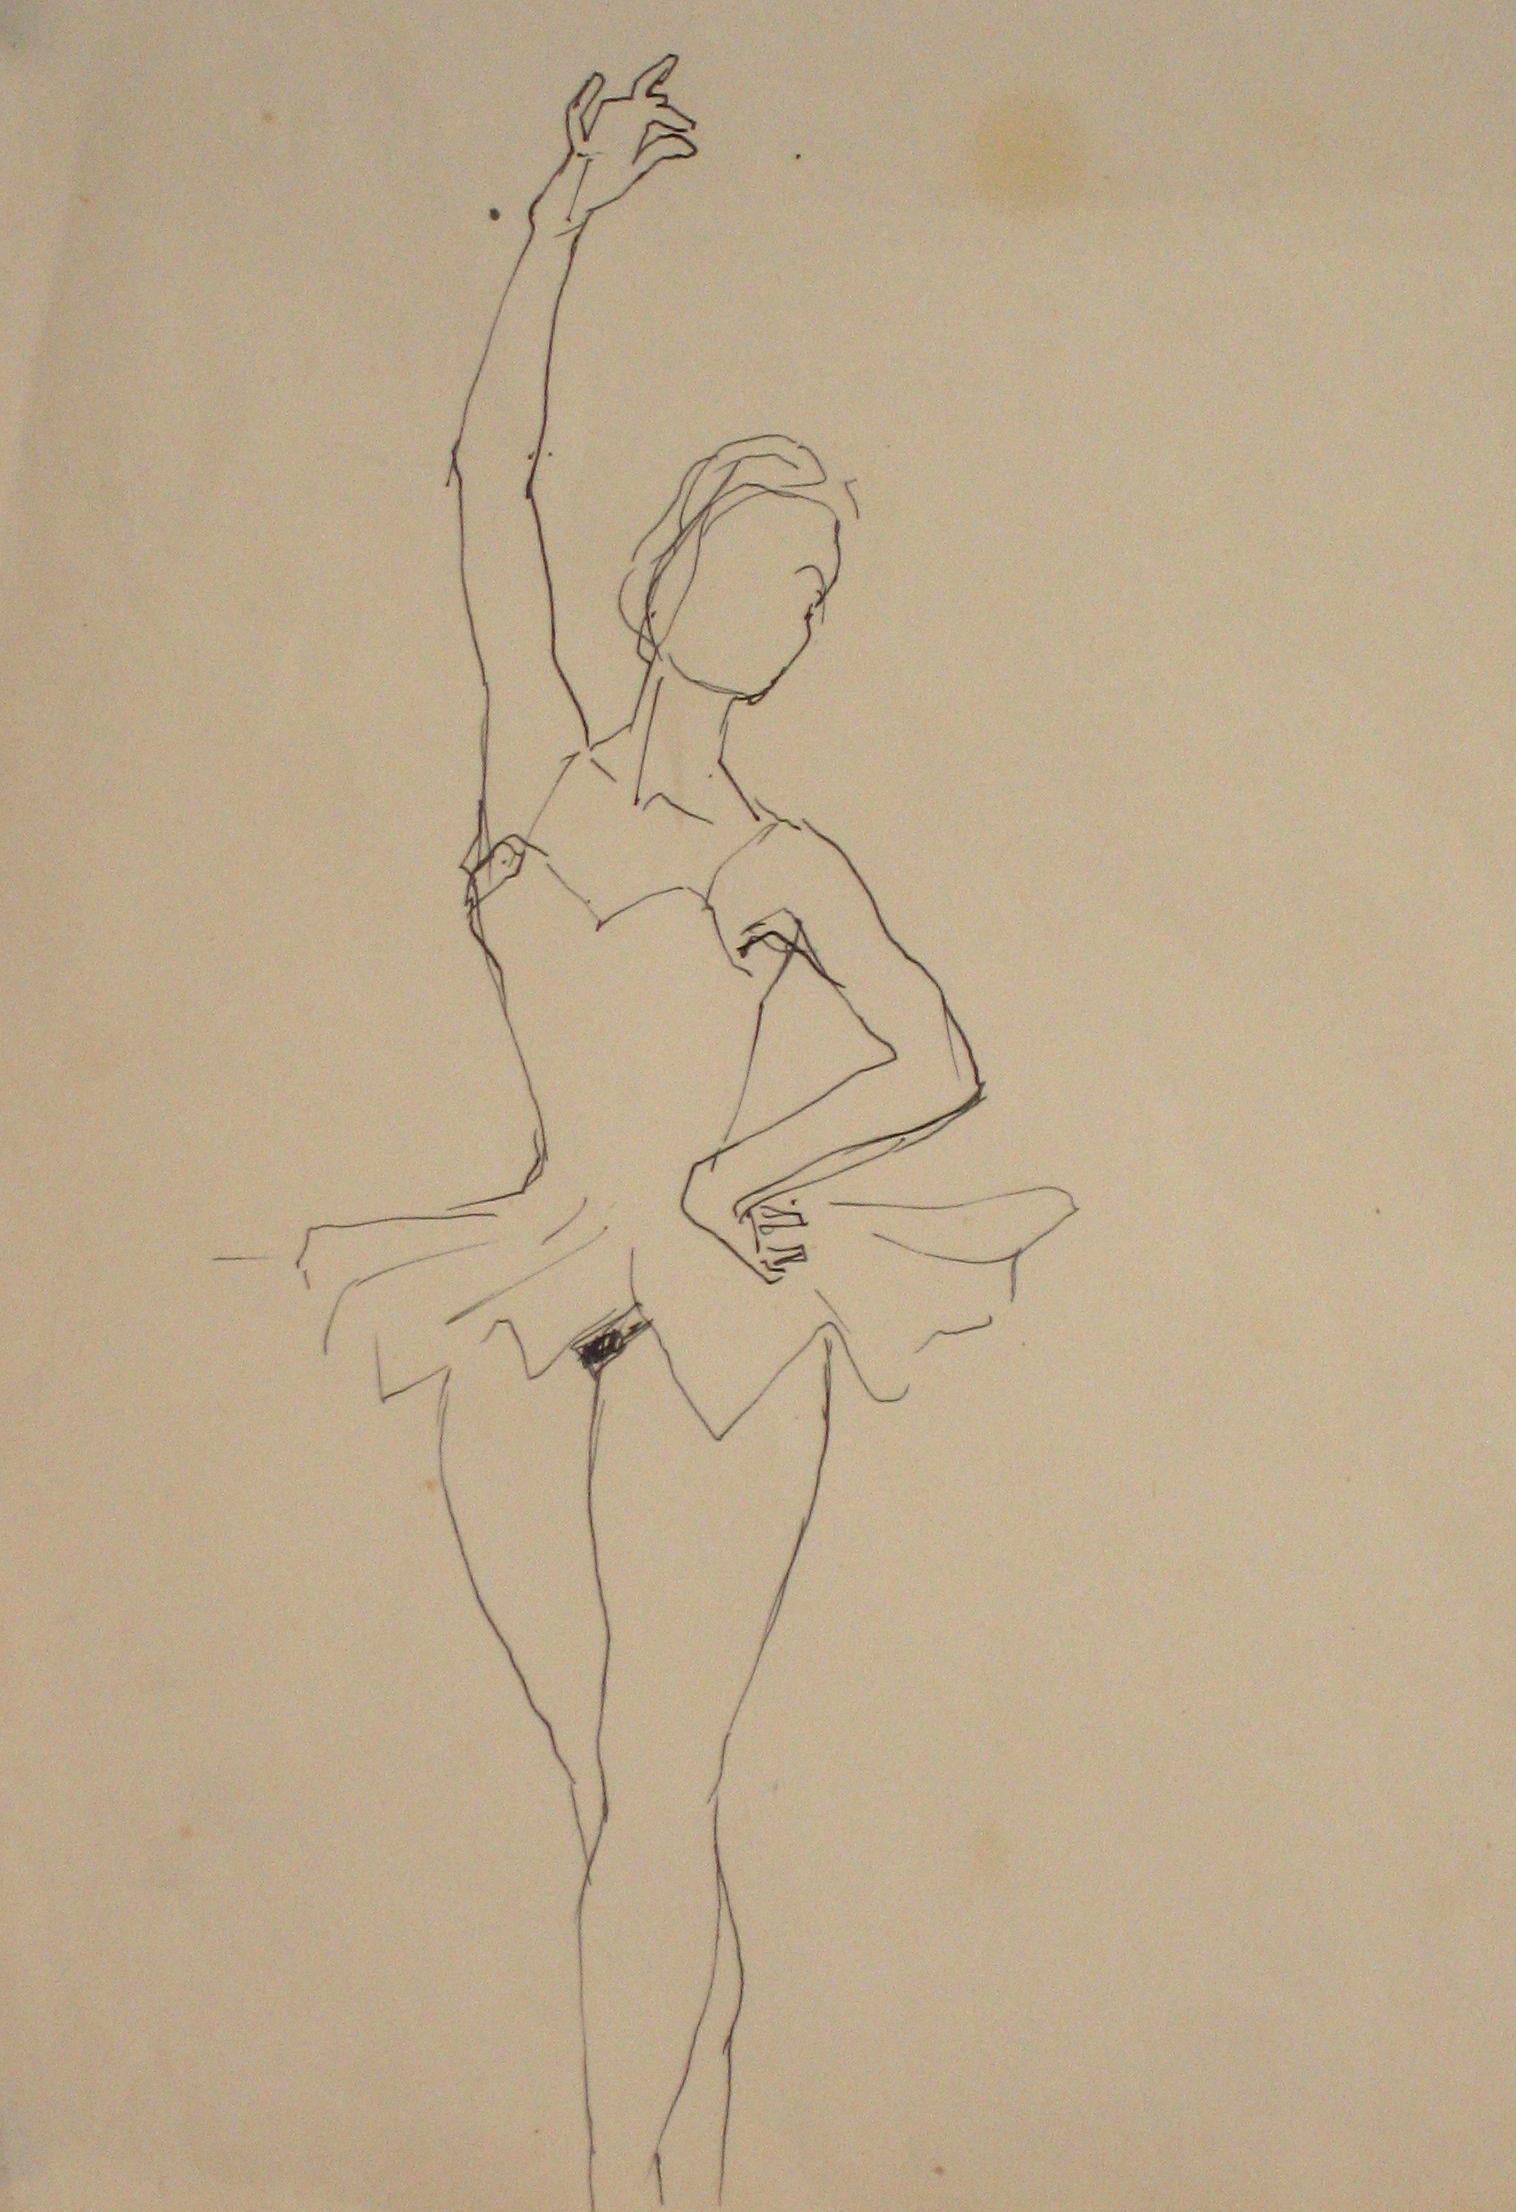 Unknown Figurative Art - Vintage Ink Drawing of a Ballerina in Fourth Position